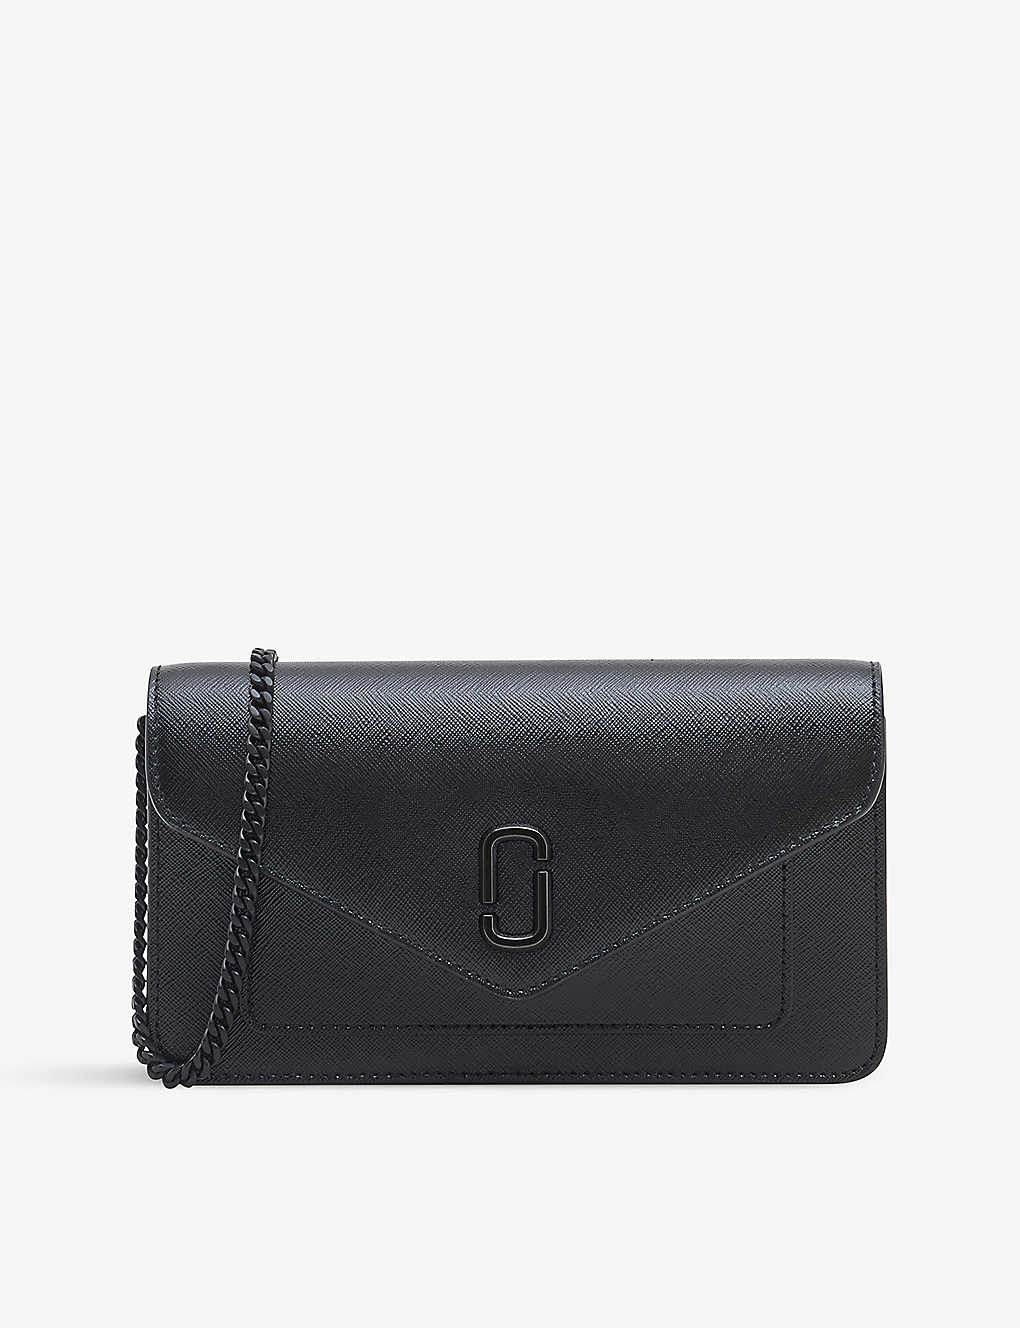 MARC JACOBS THE LONGSHOT LEATHER CHAIN WALLET